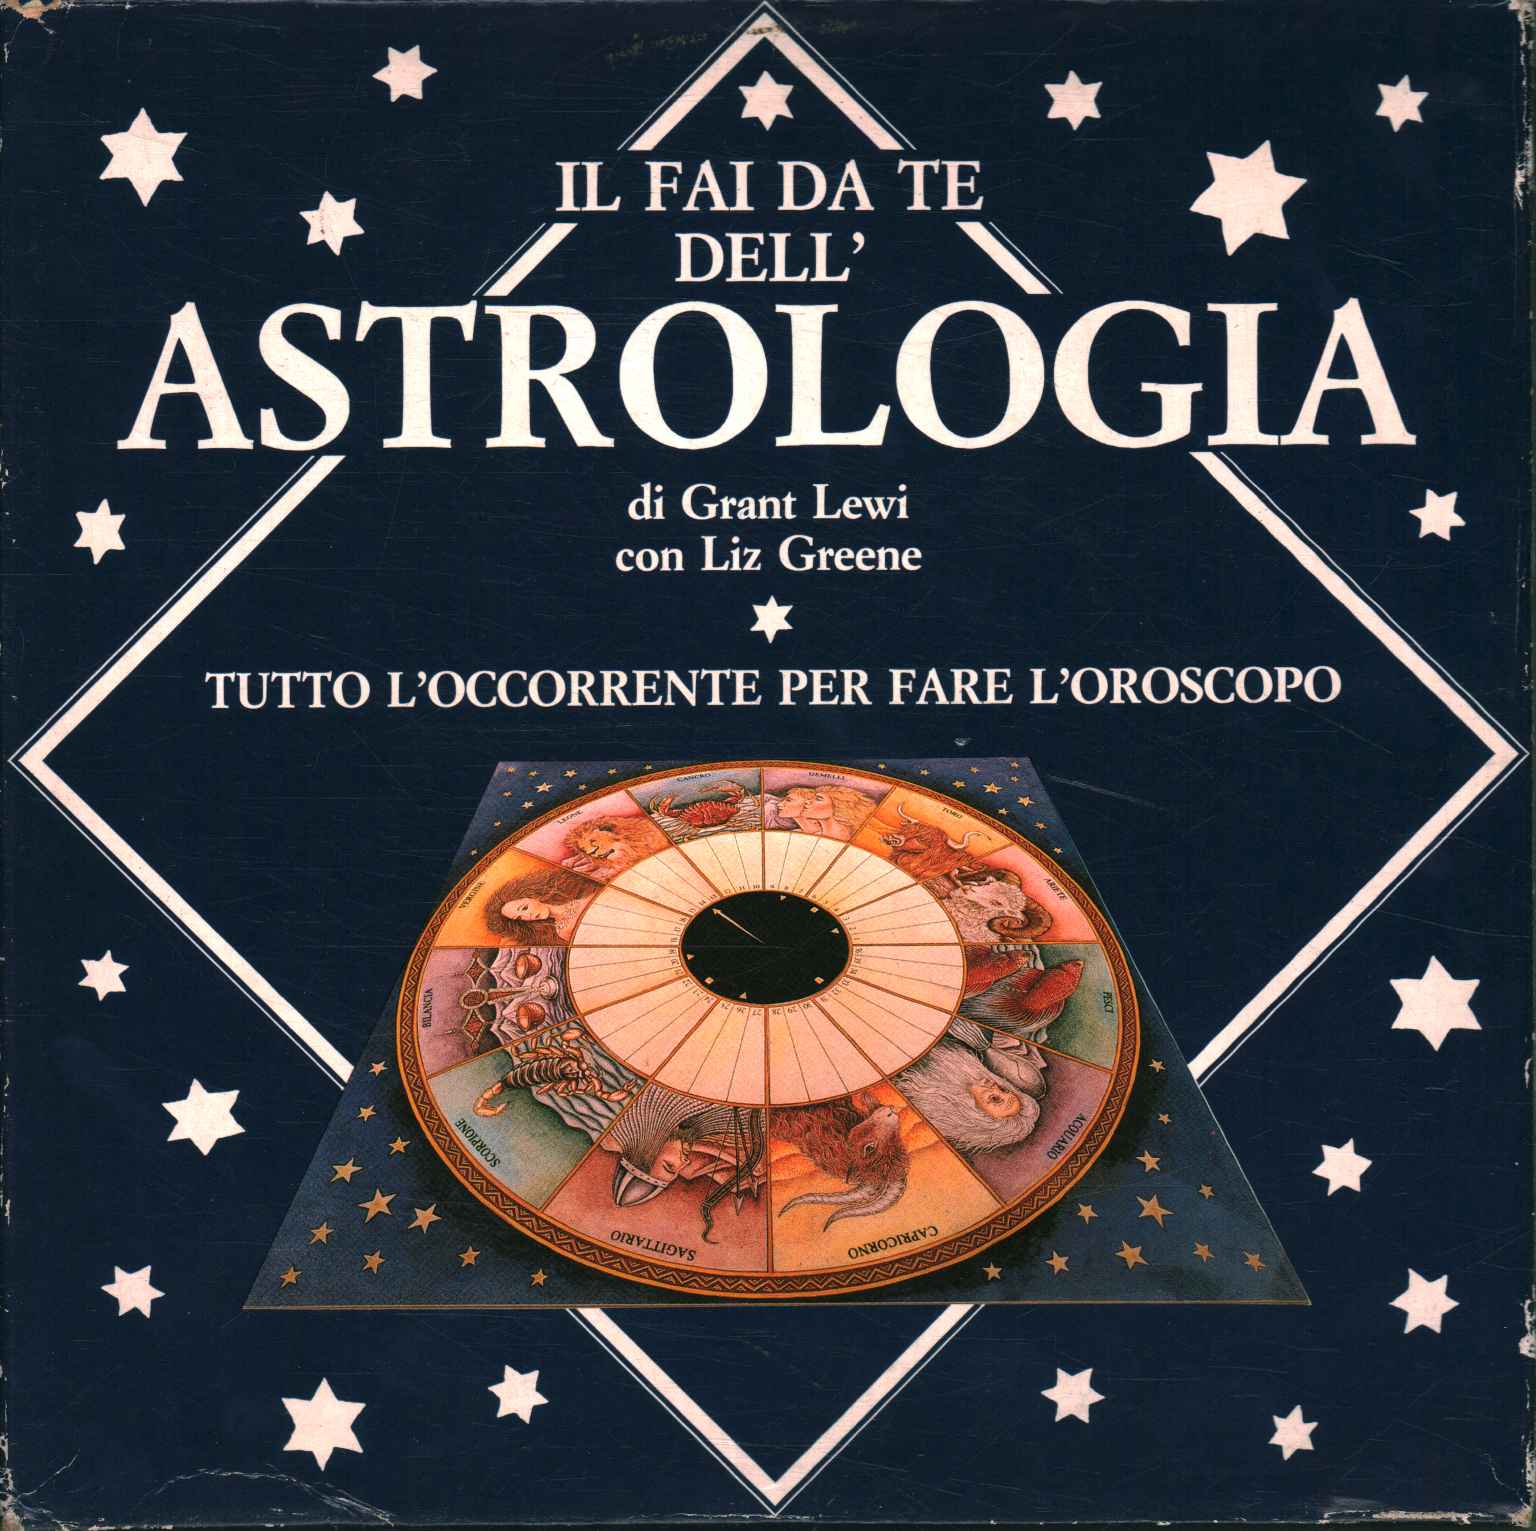 The do it yourself of astrology